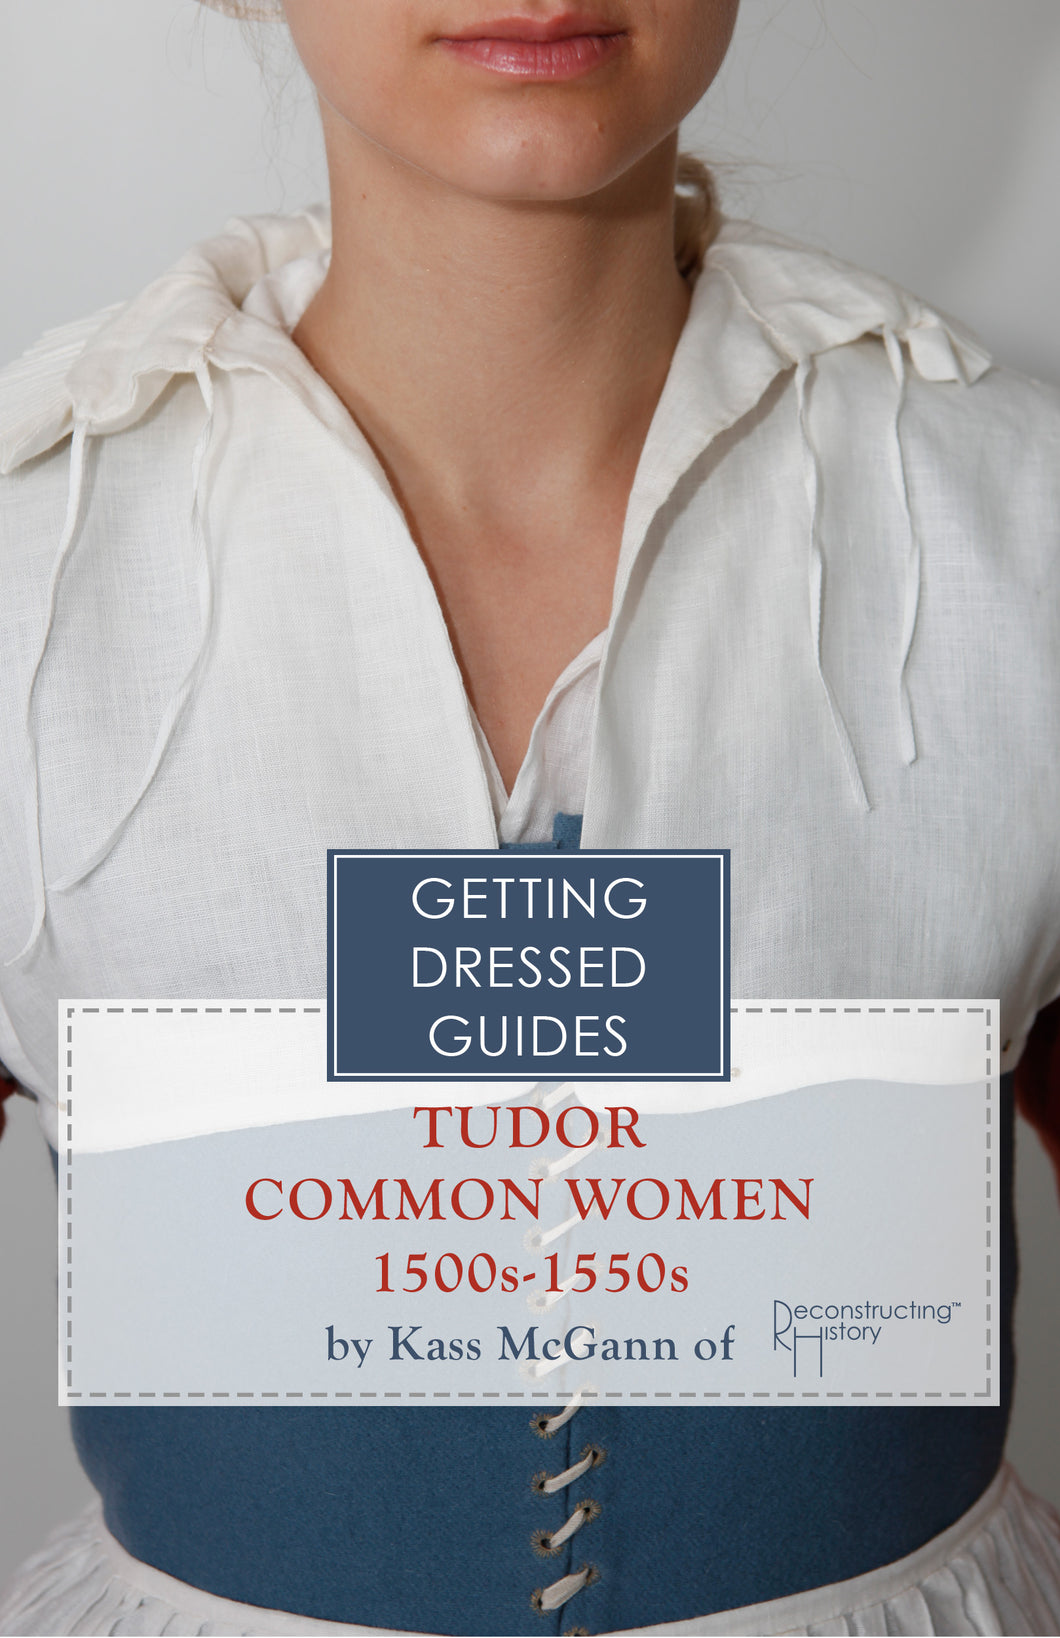 Early 16th century Tudor Common Women's Getting Dressed Guide